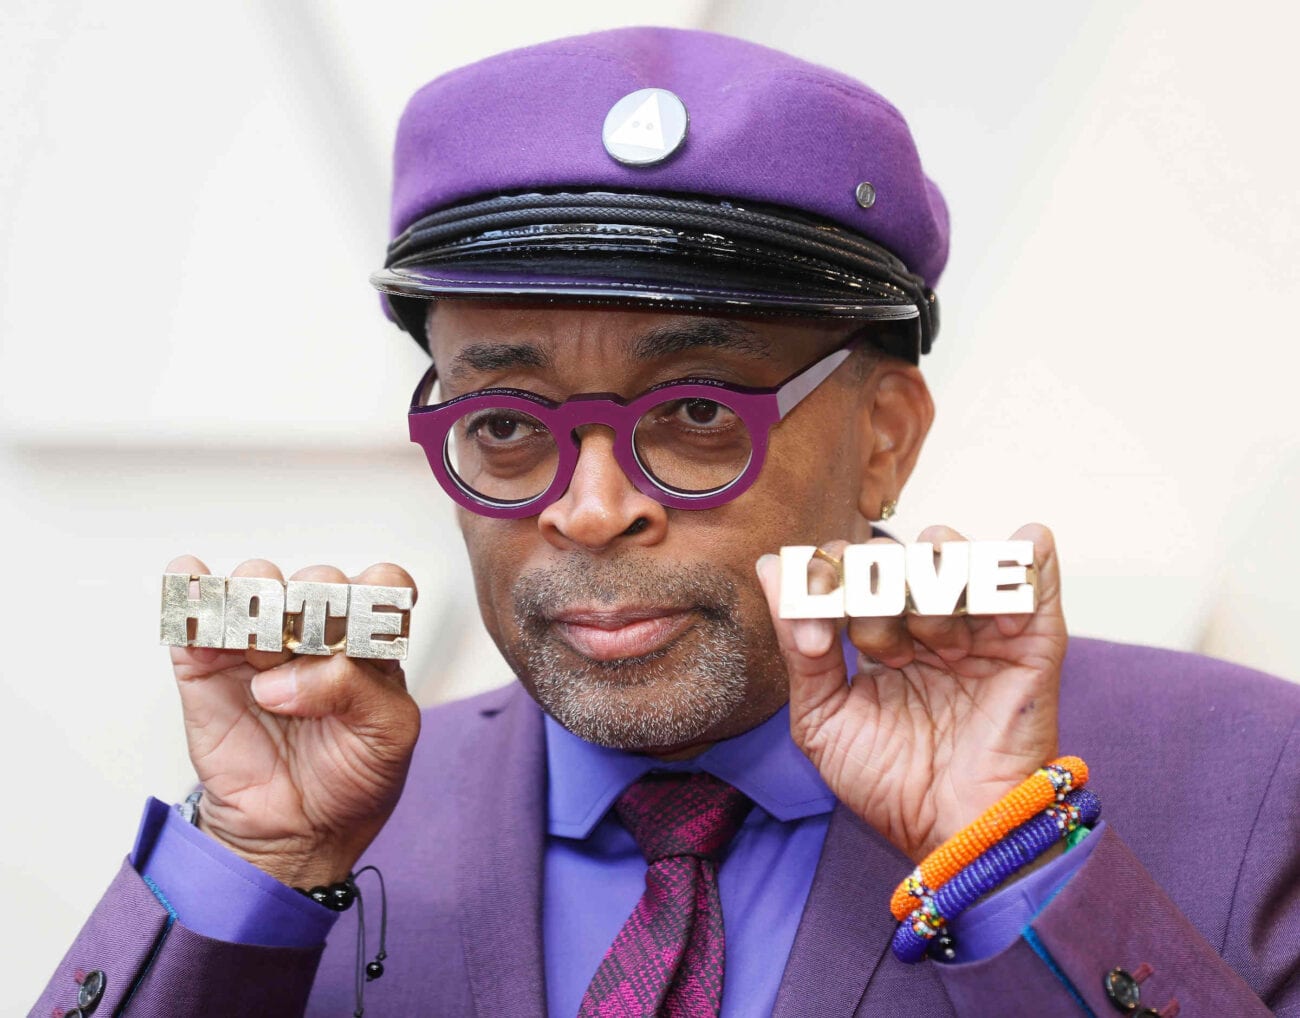 Spike Lee is known for writing & directing movies that highlight racial injustices with brutal honesty. Here's his latest short.